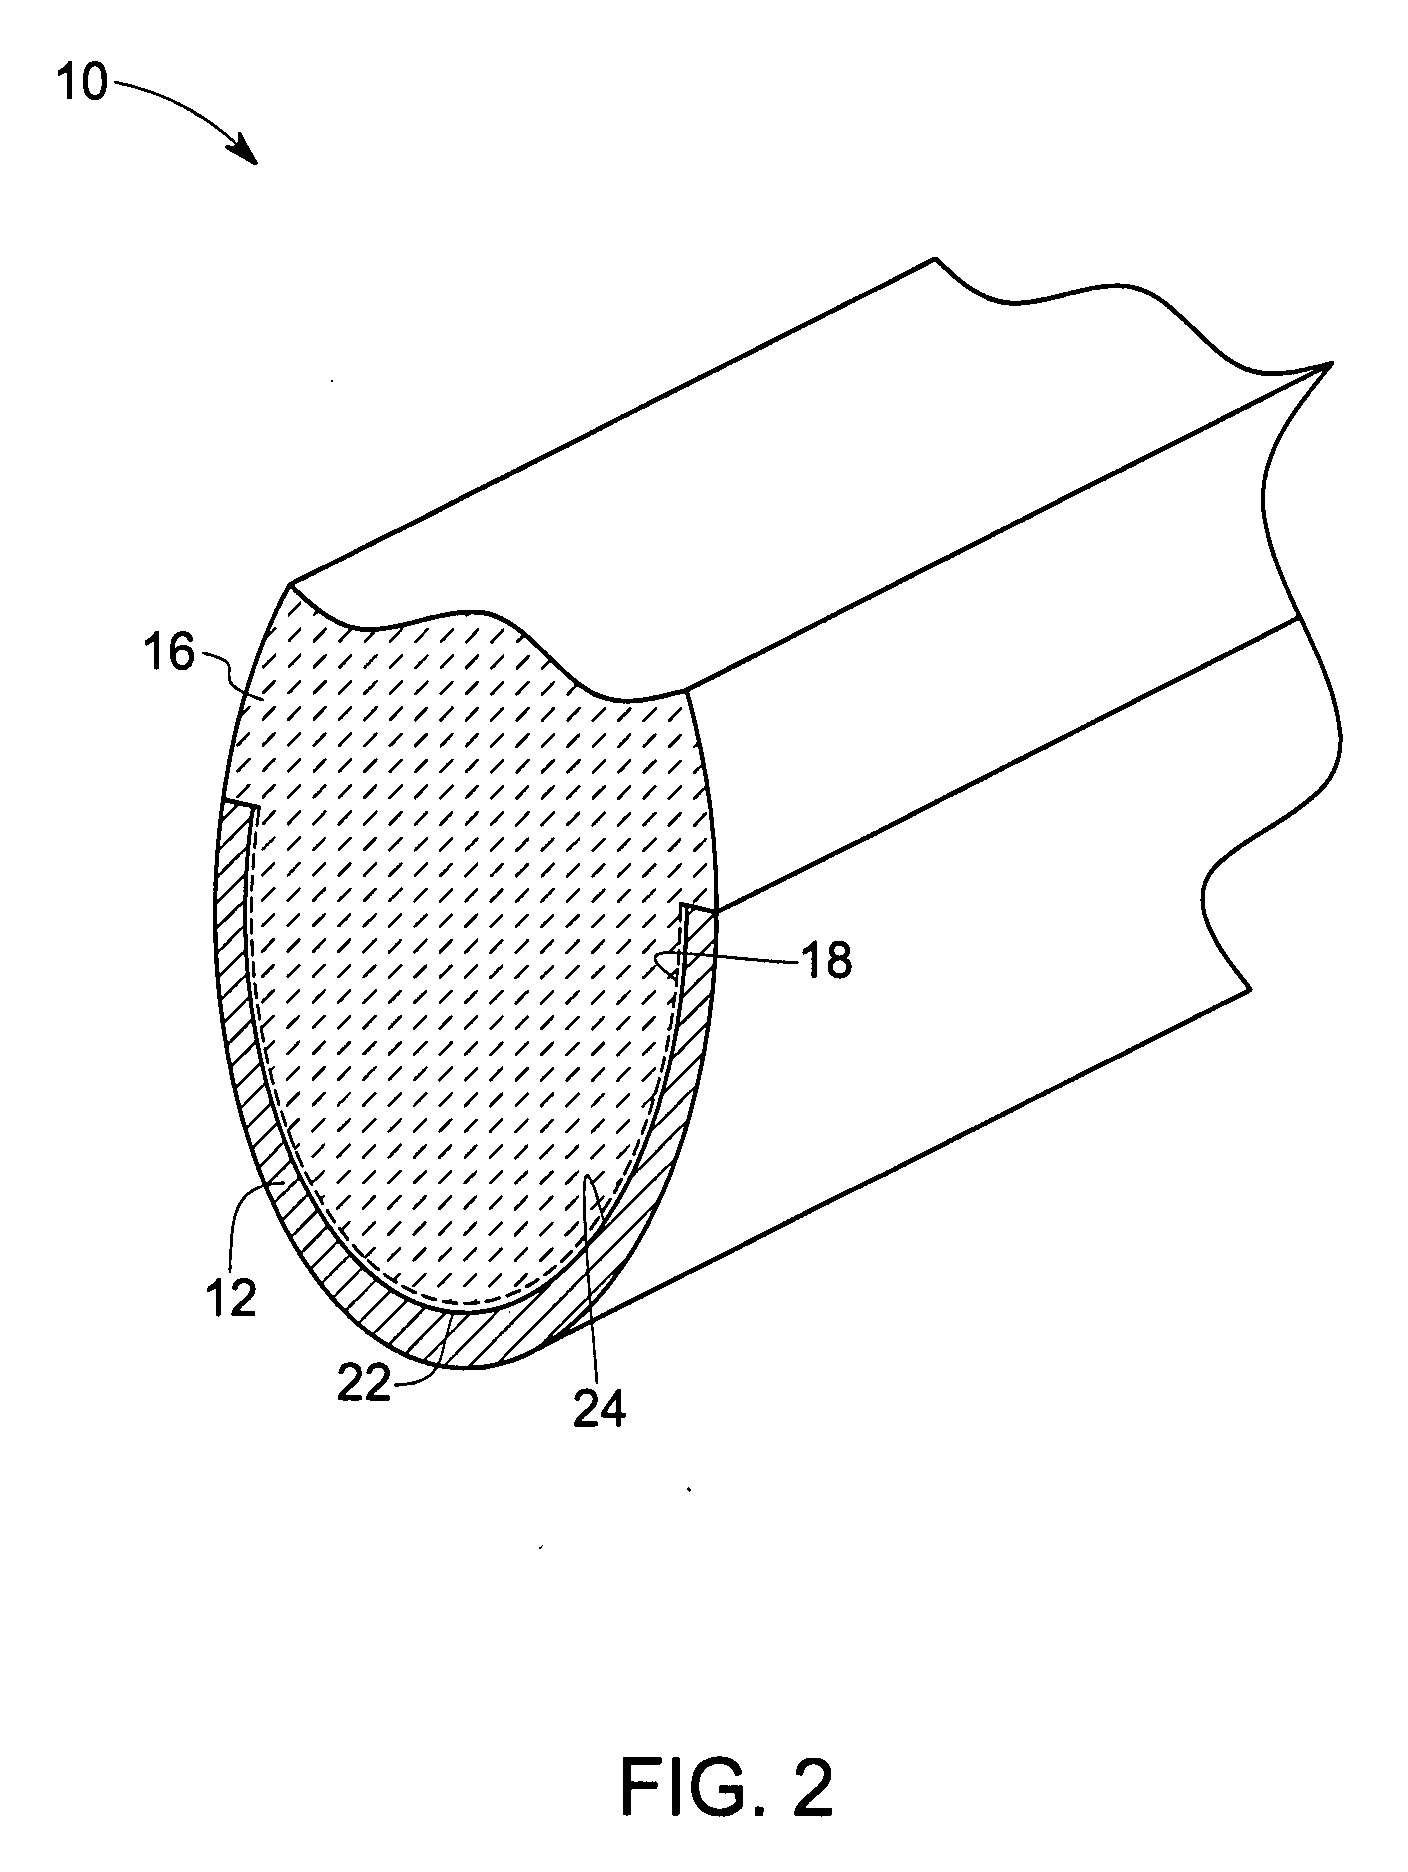 Method for roughening metal surfaces and article manufactured thereby